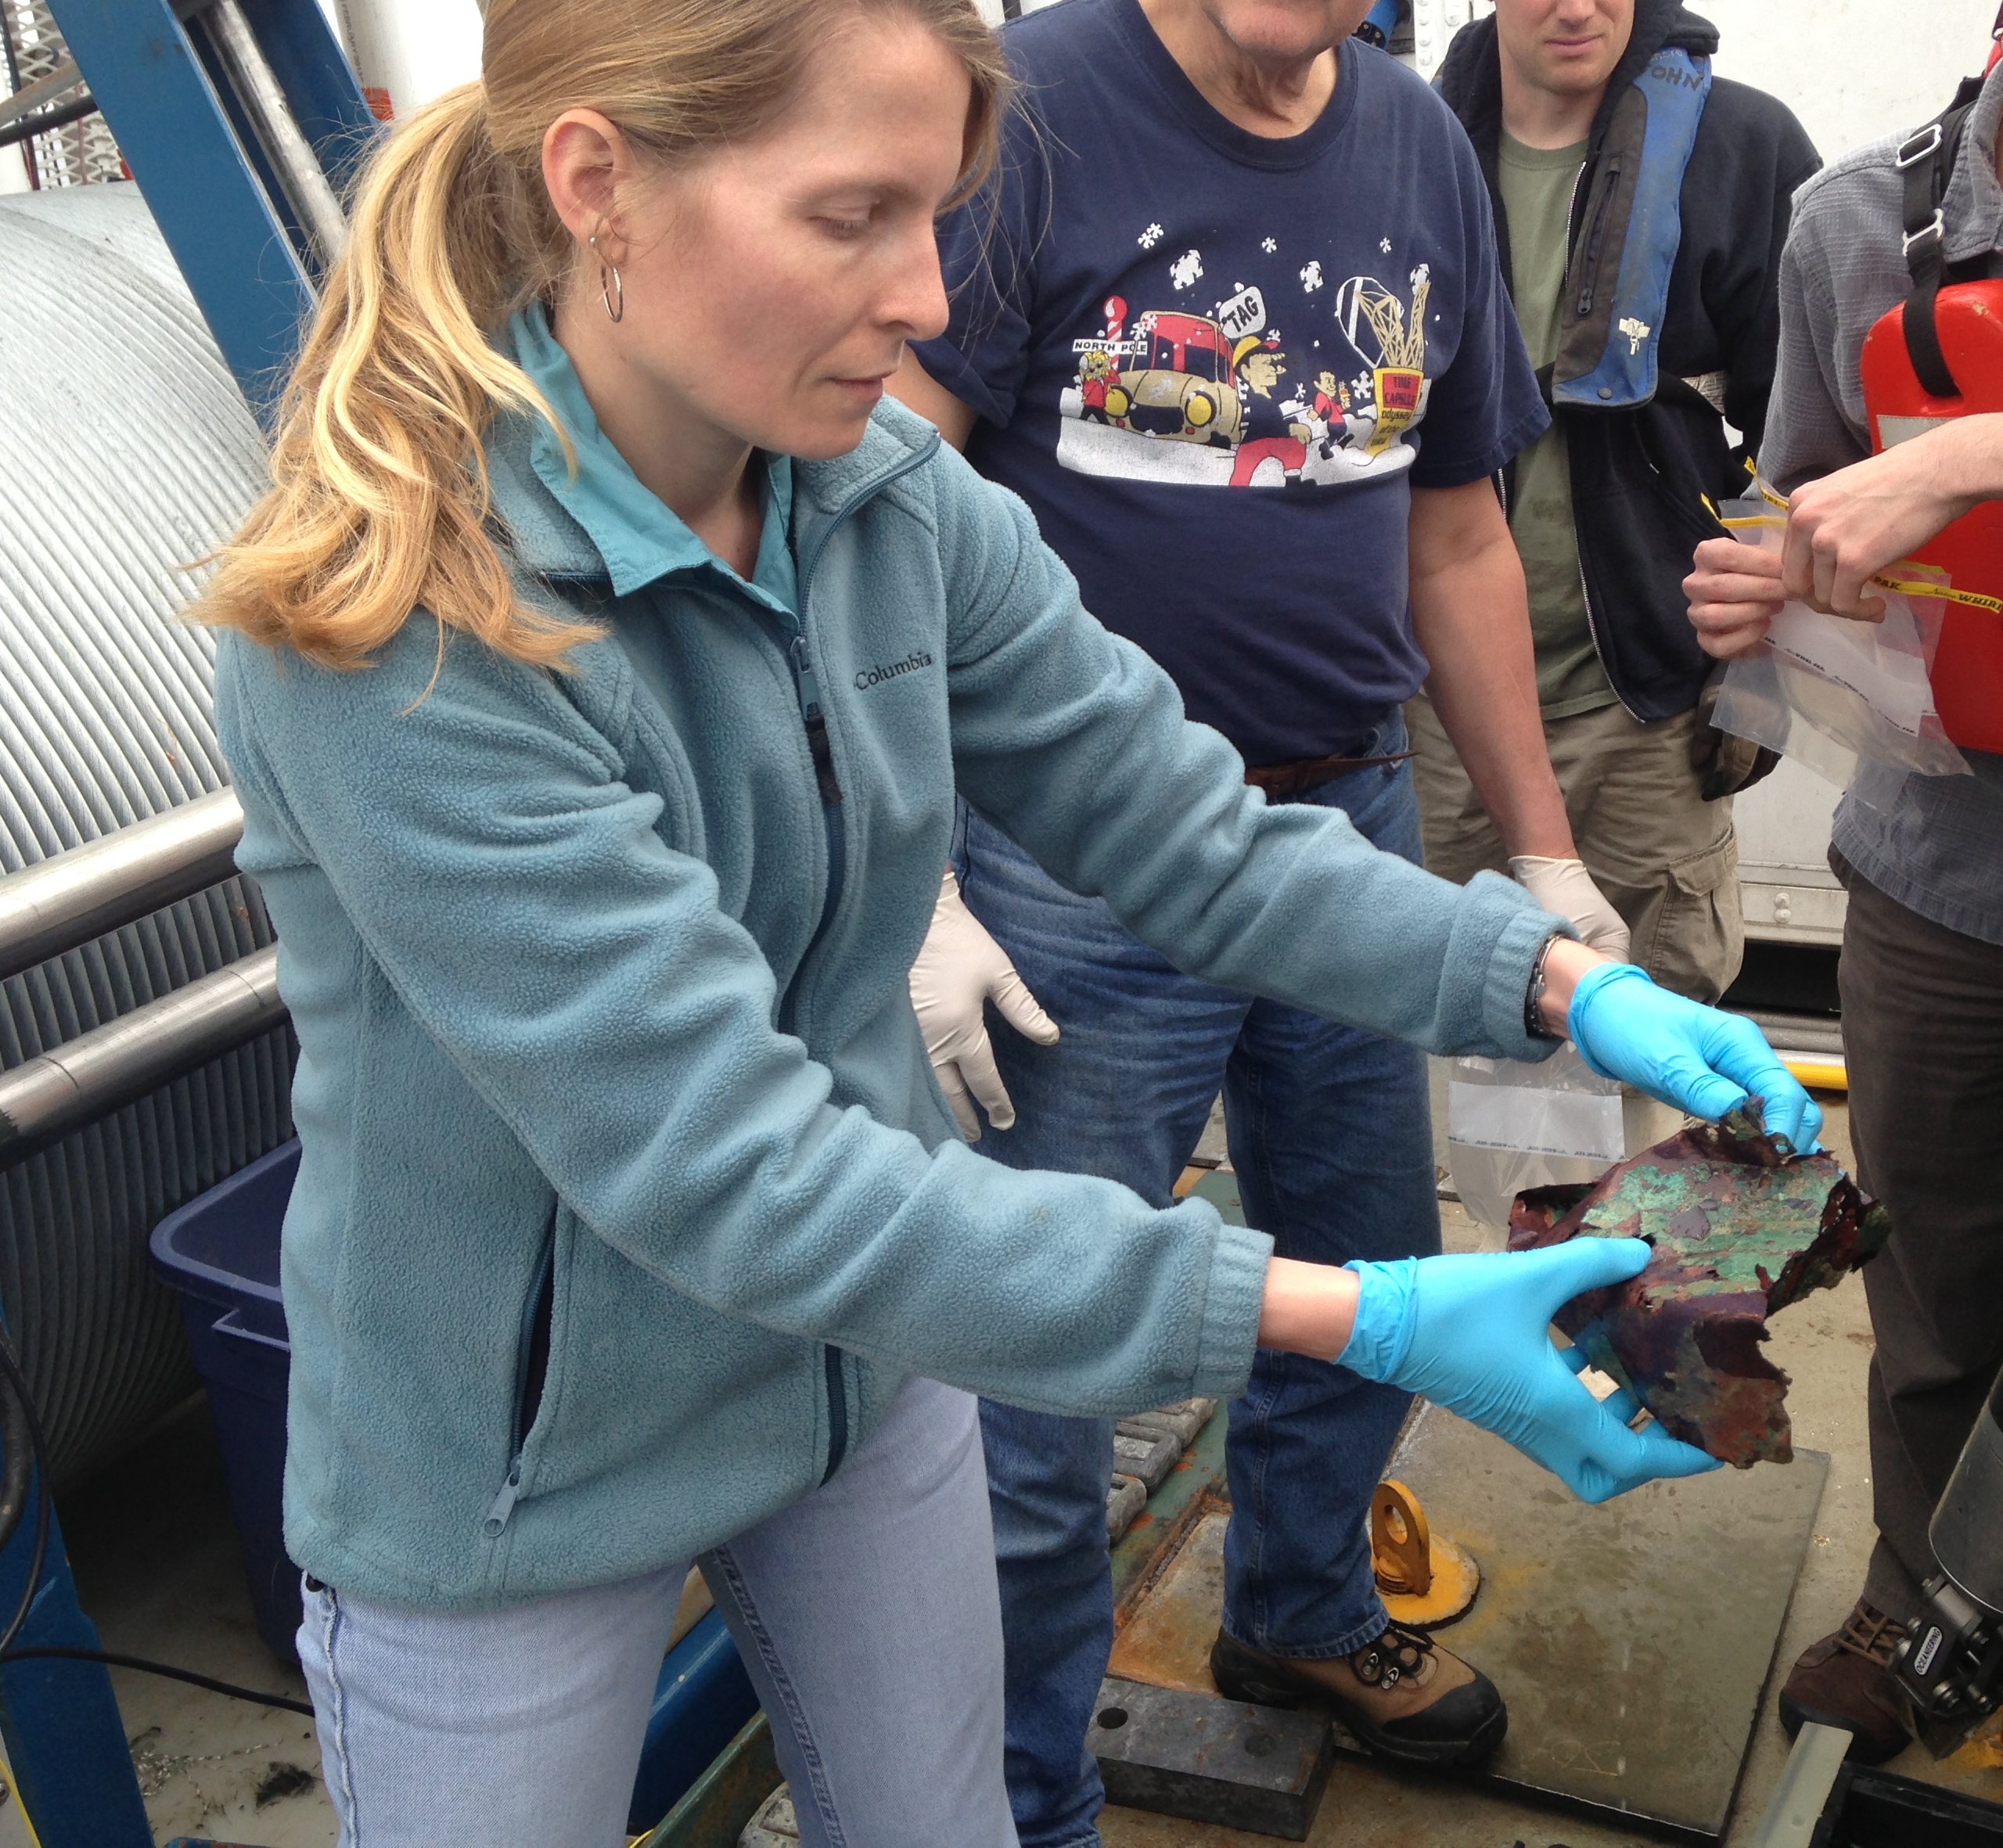 Melanie holds a metal sample in gloved hands with a group of people in the background.